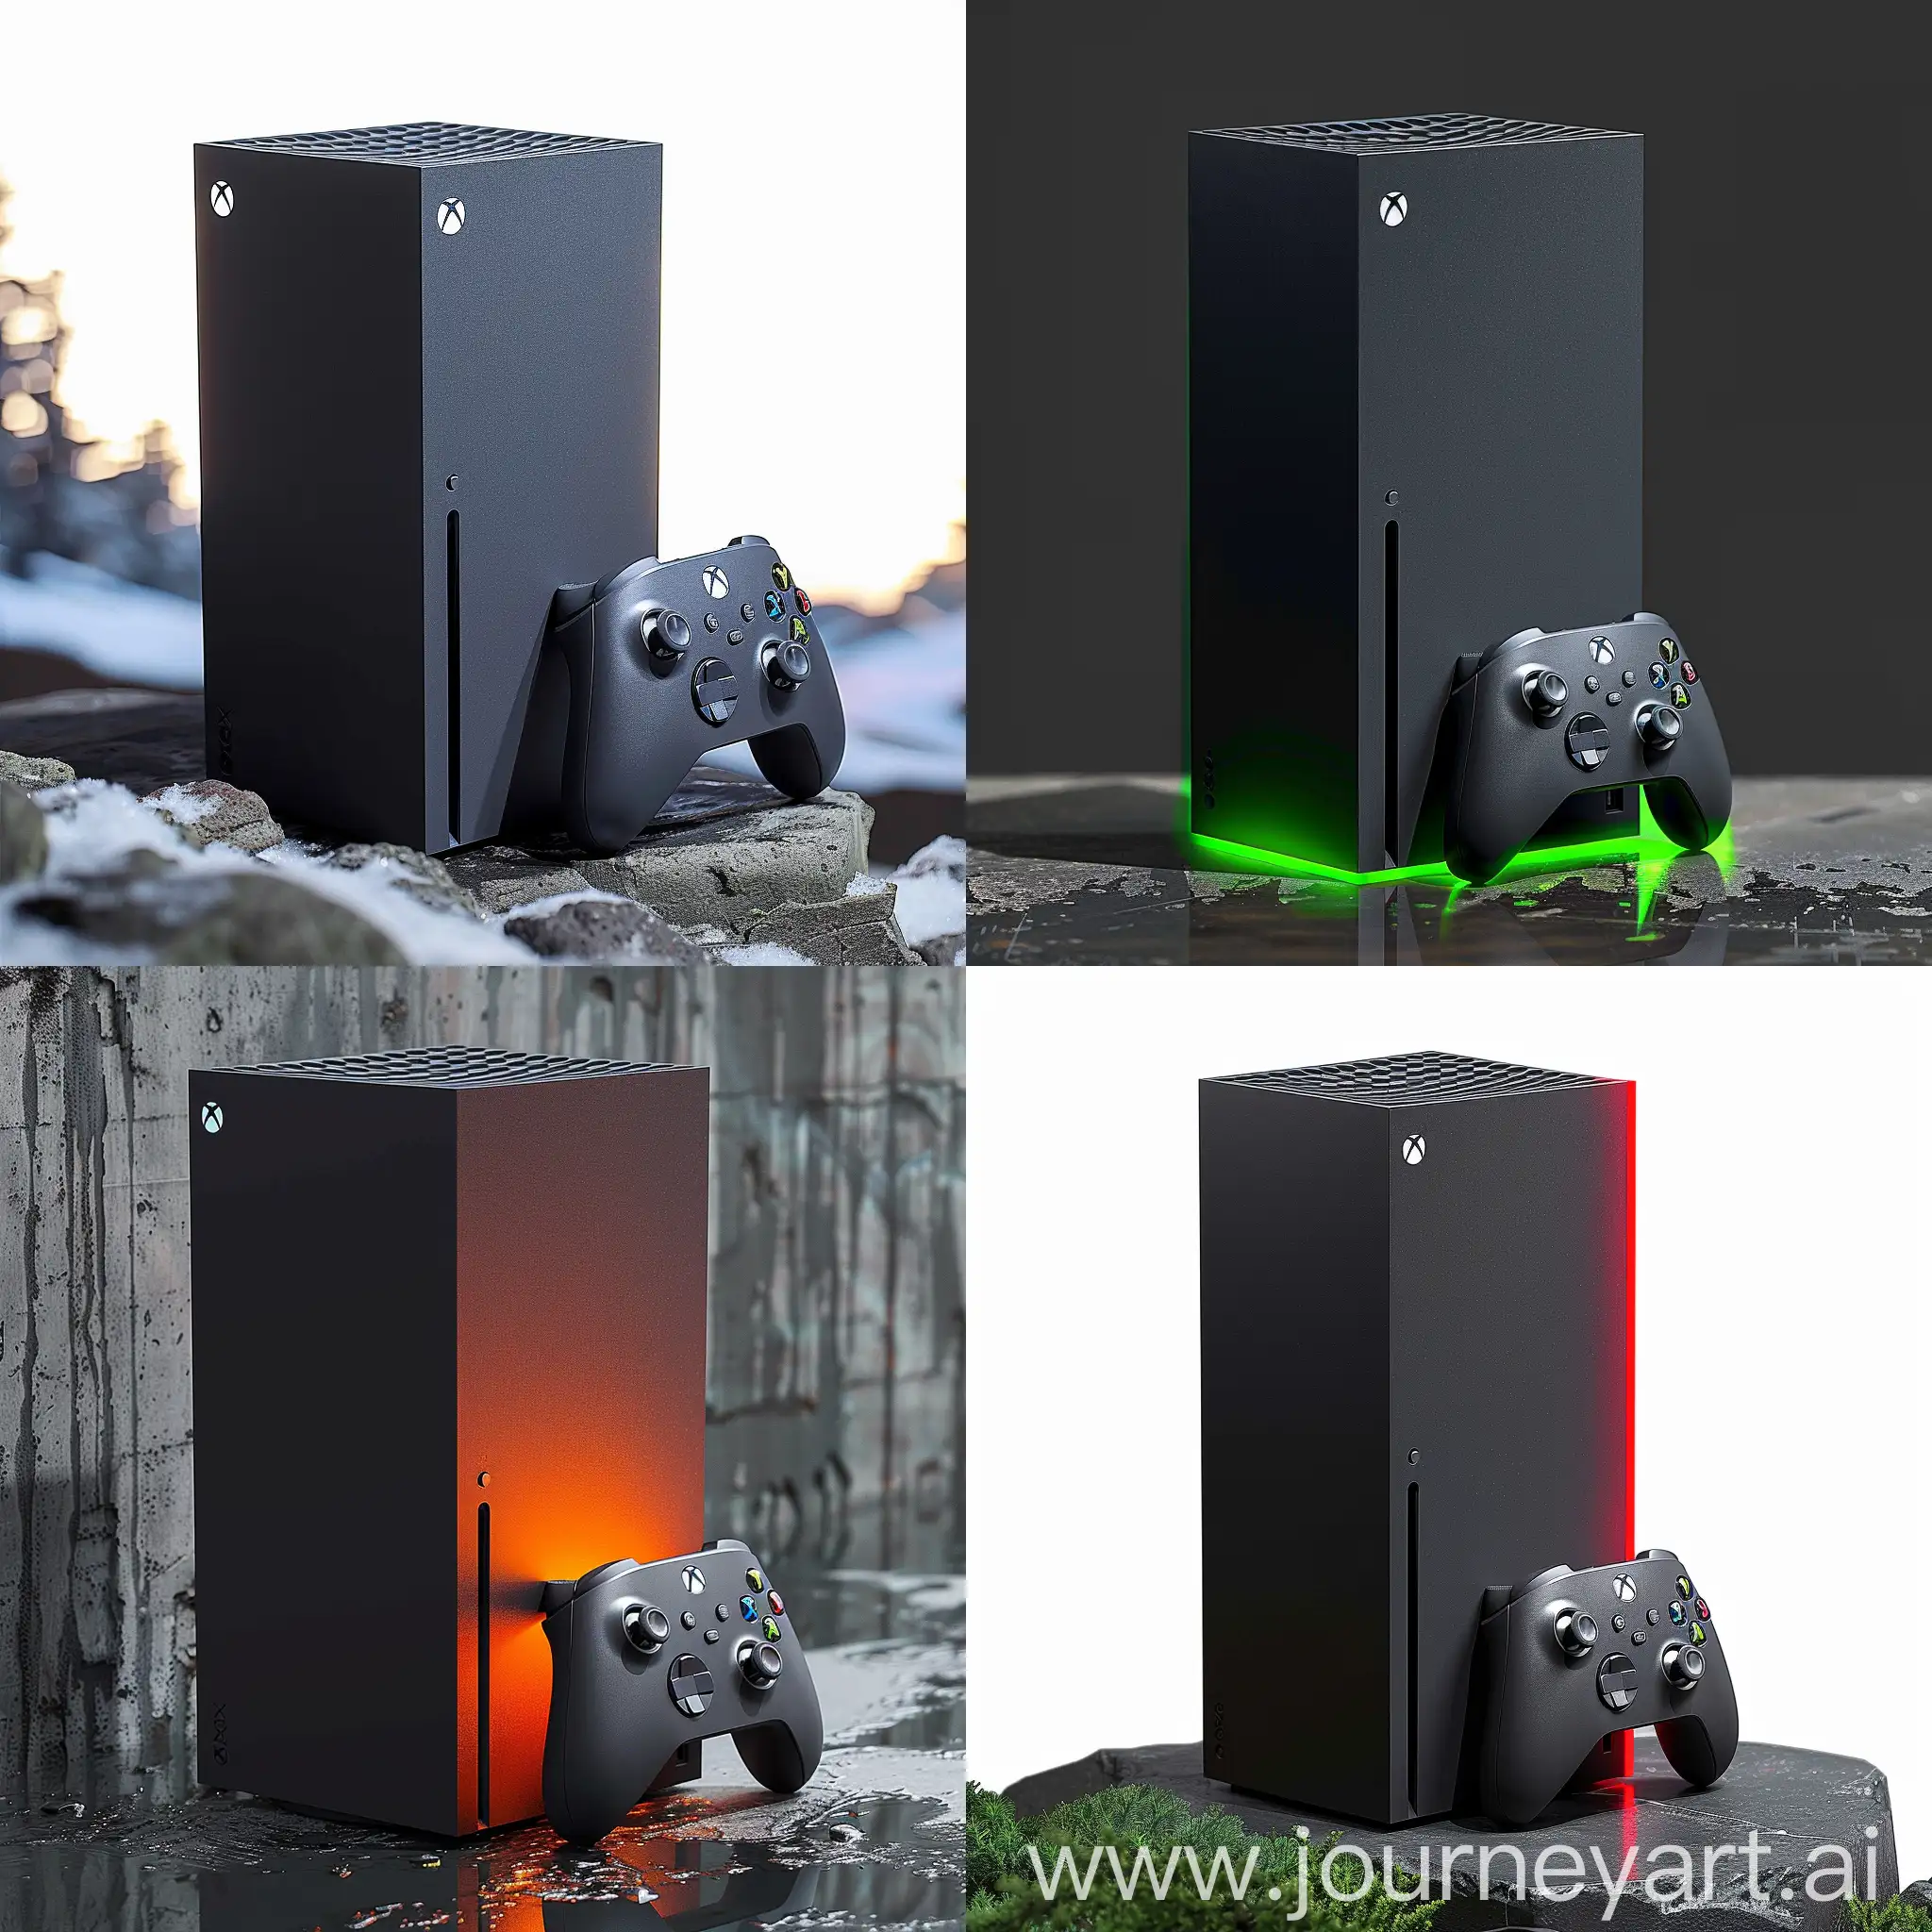 Futuristic-Xbox-Series-X-Console-for-4K-Gaming-and-Exclusive-Content